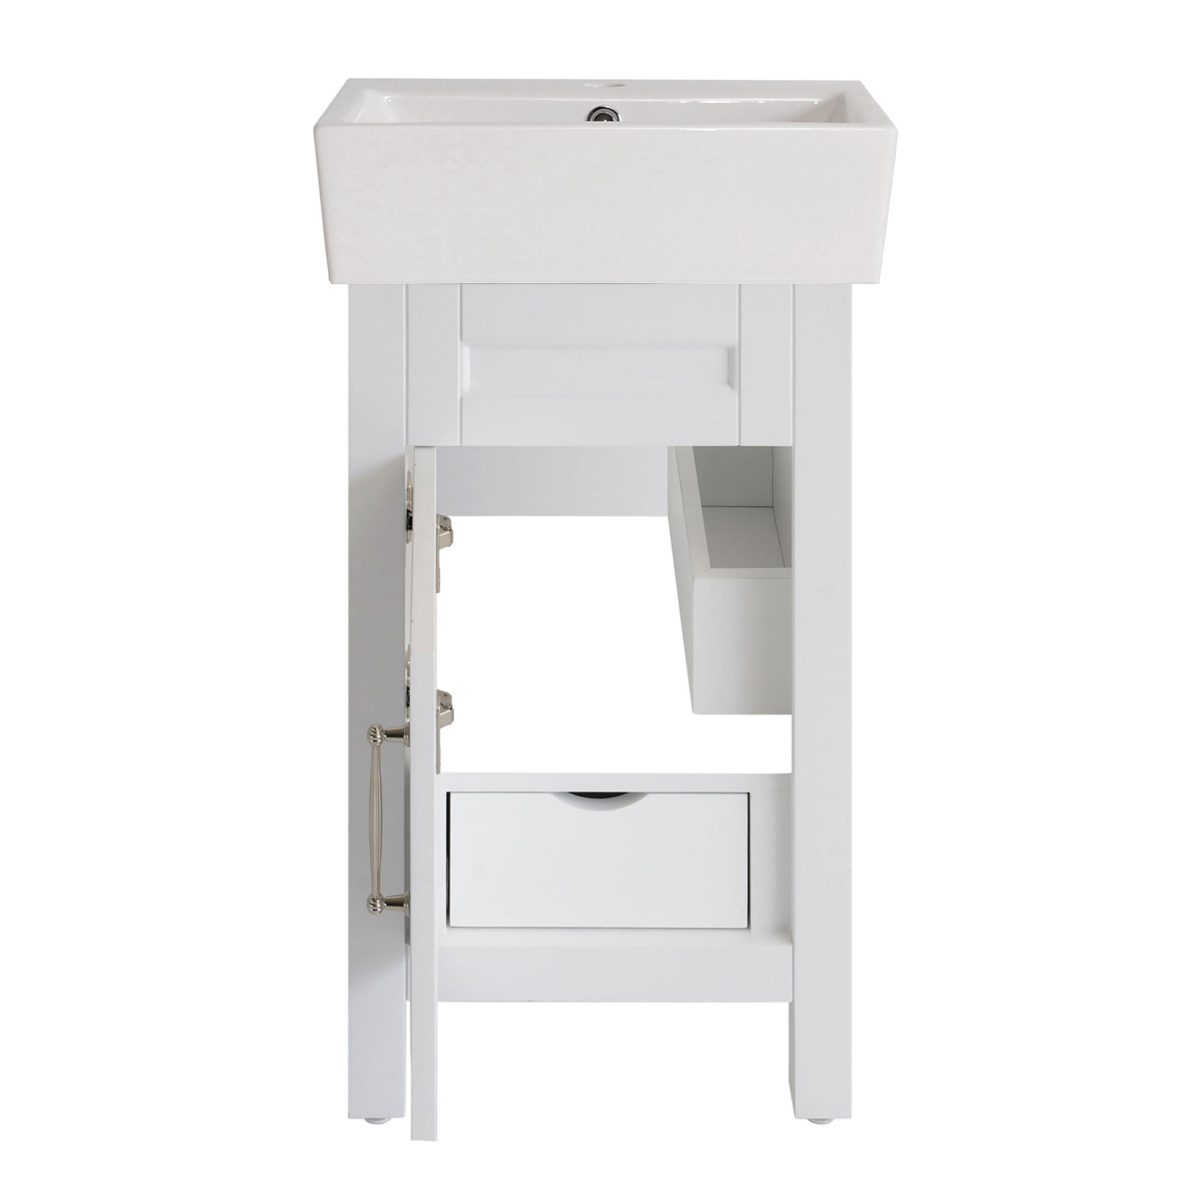 18 inch white vanity without top door details a